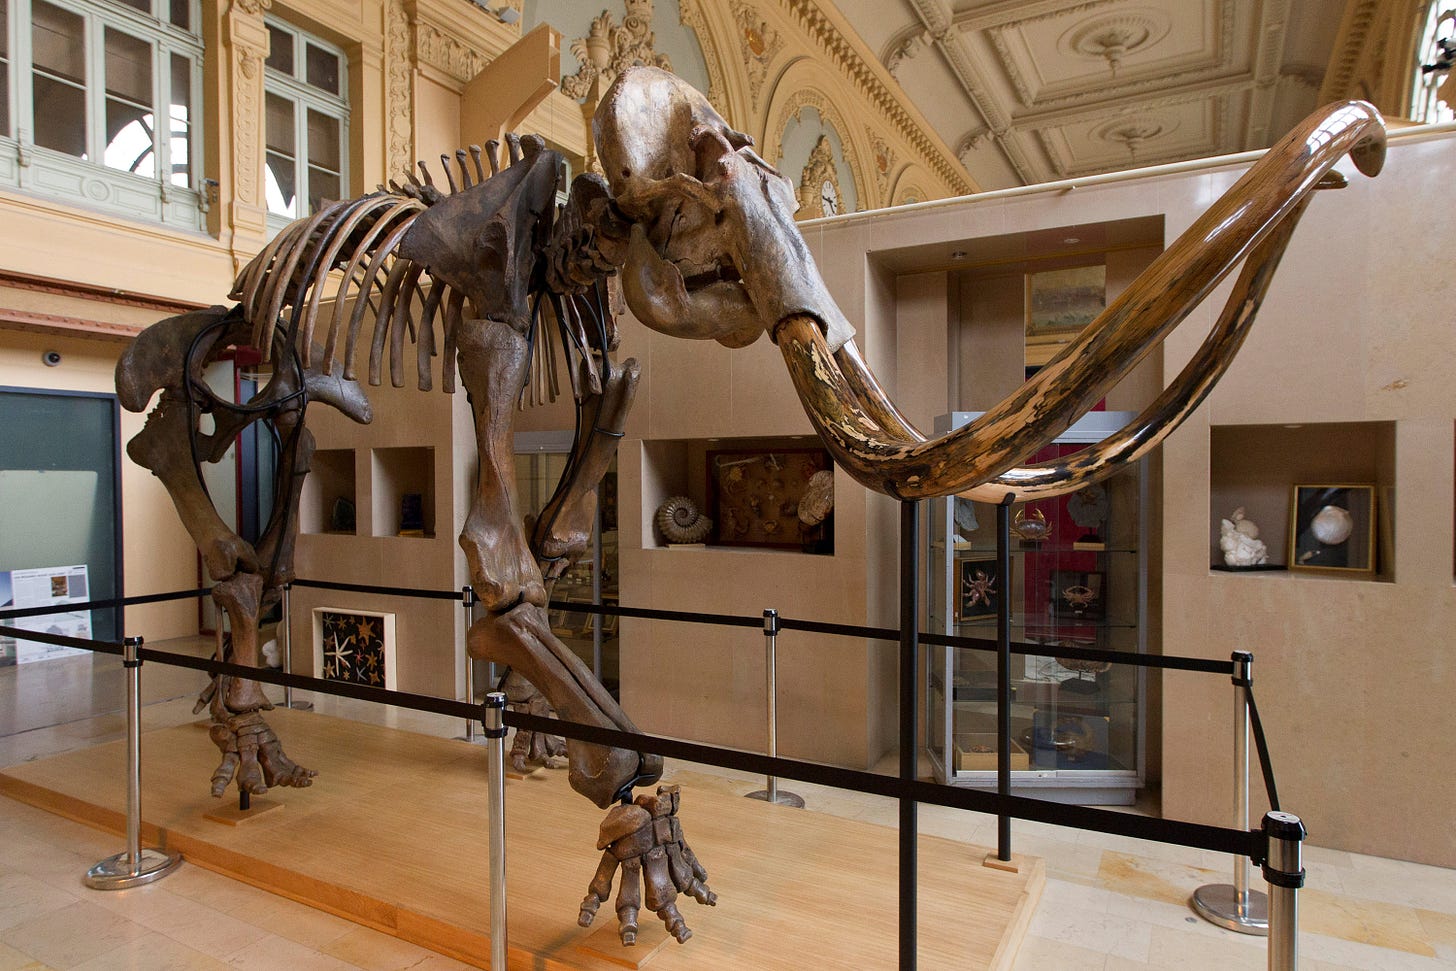 Woolly mammoth skeleton sells for $645K at auction